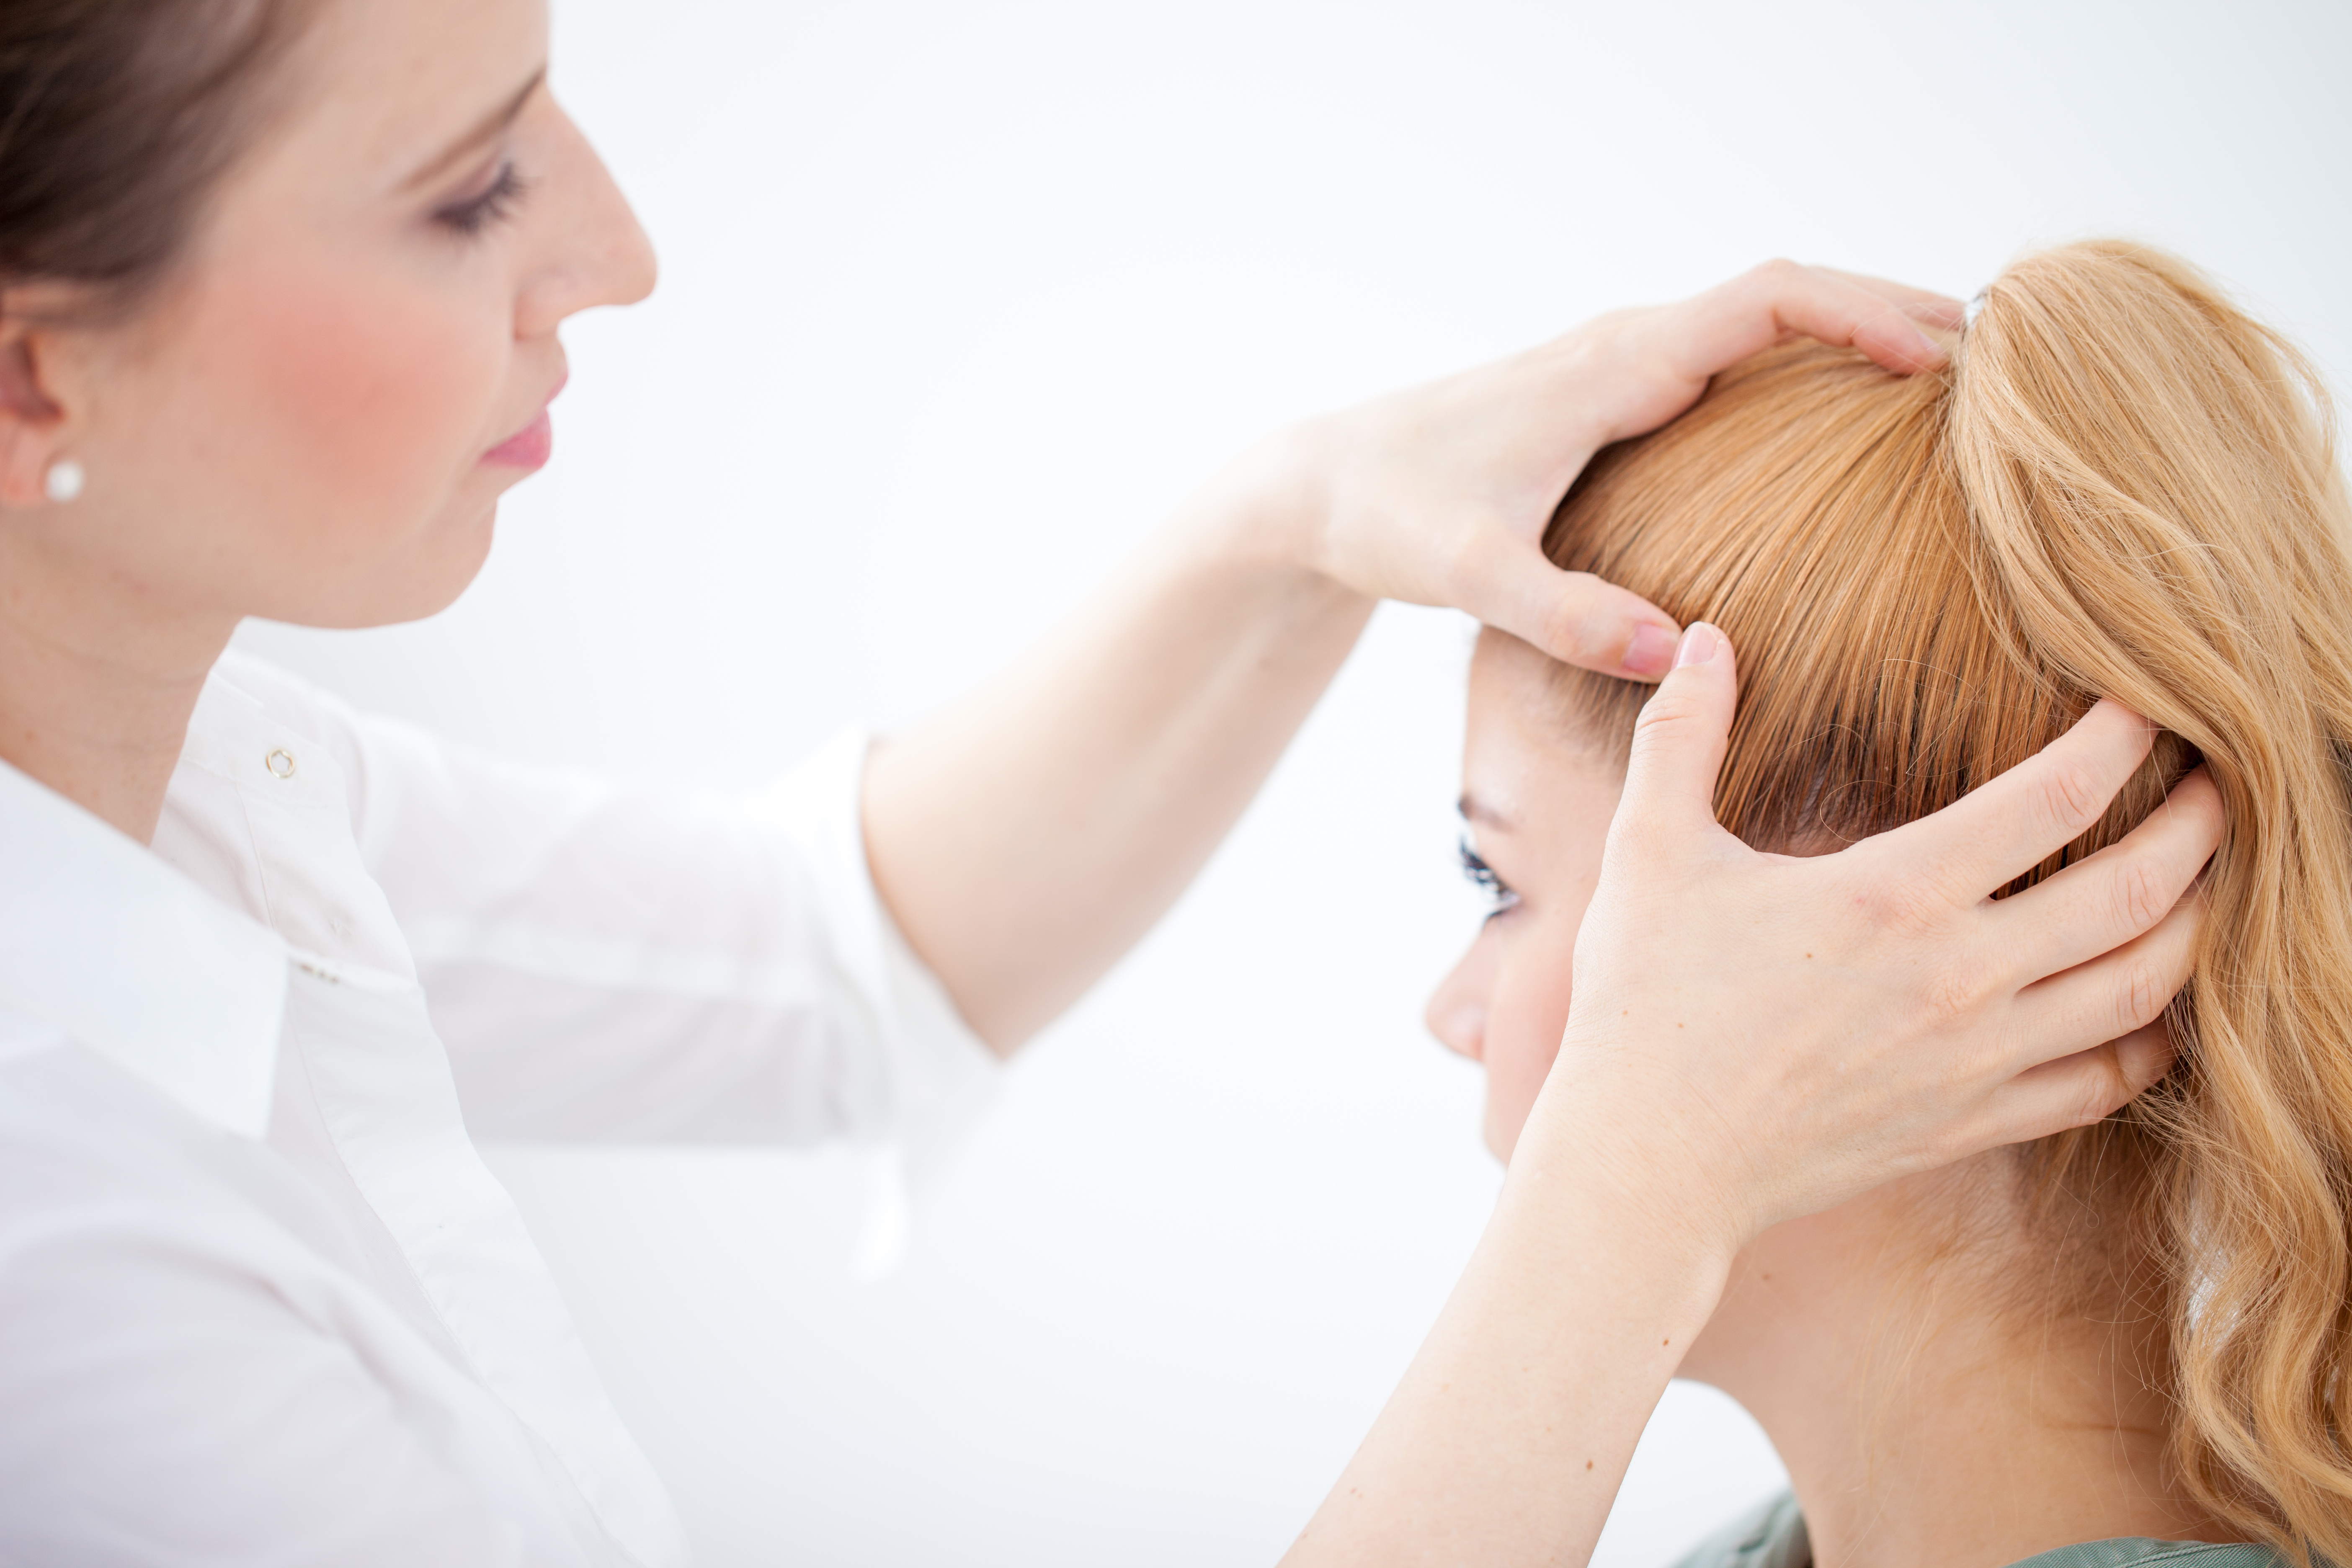 Scalp psoriasis: Shampoos, scale softeners, and other treatments